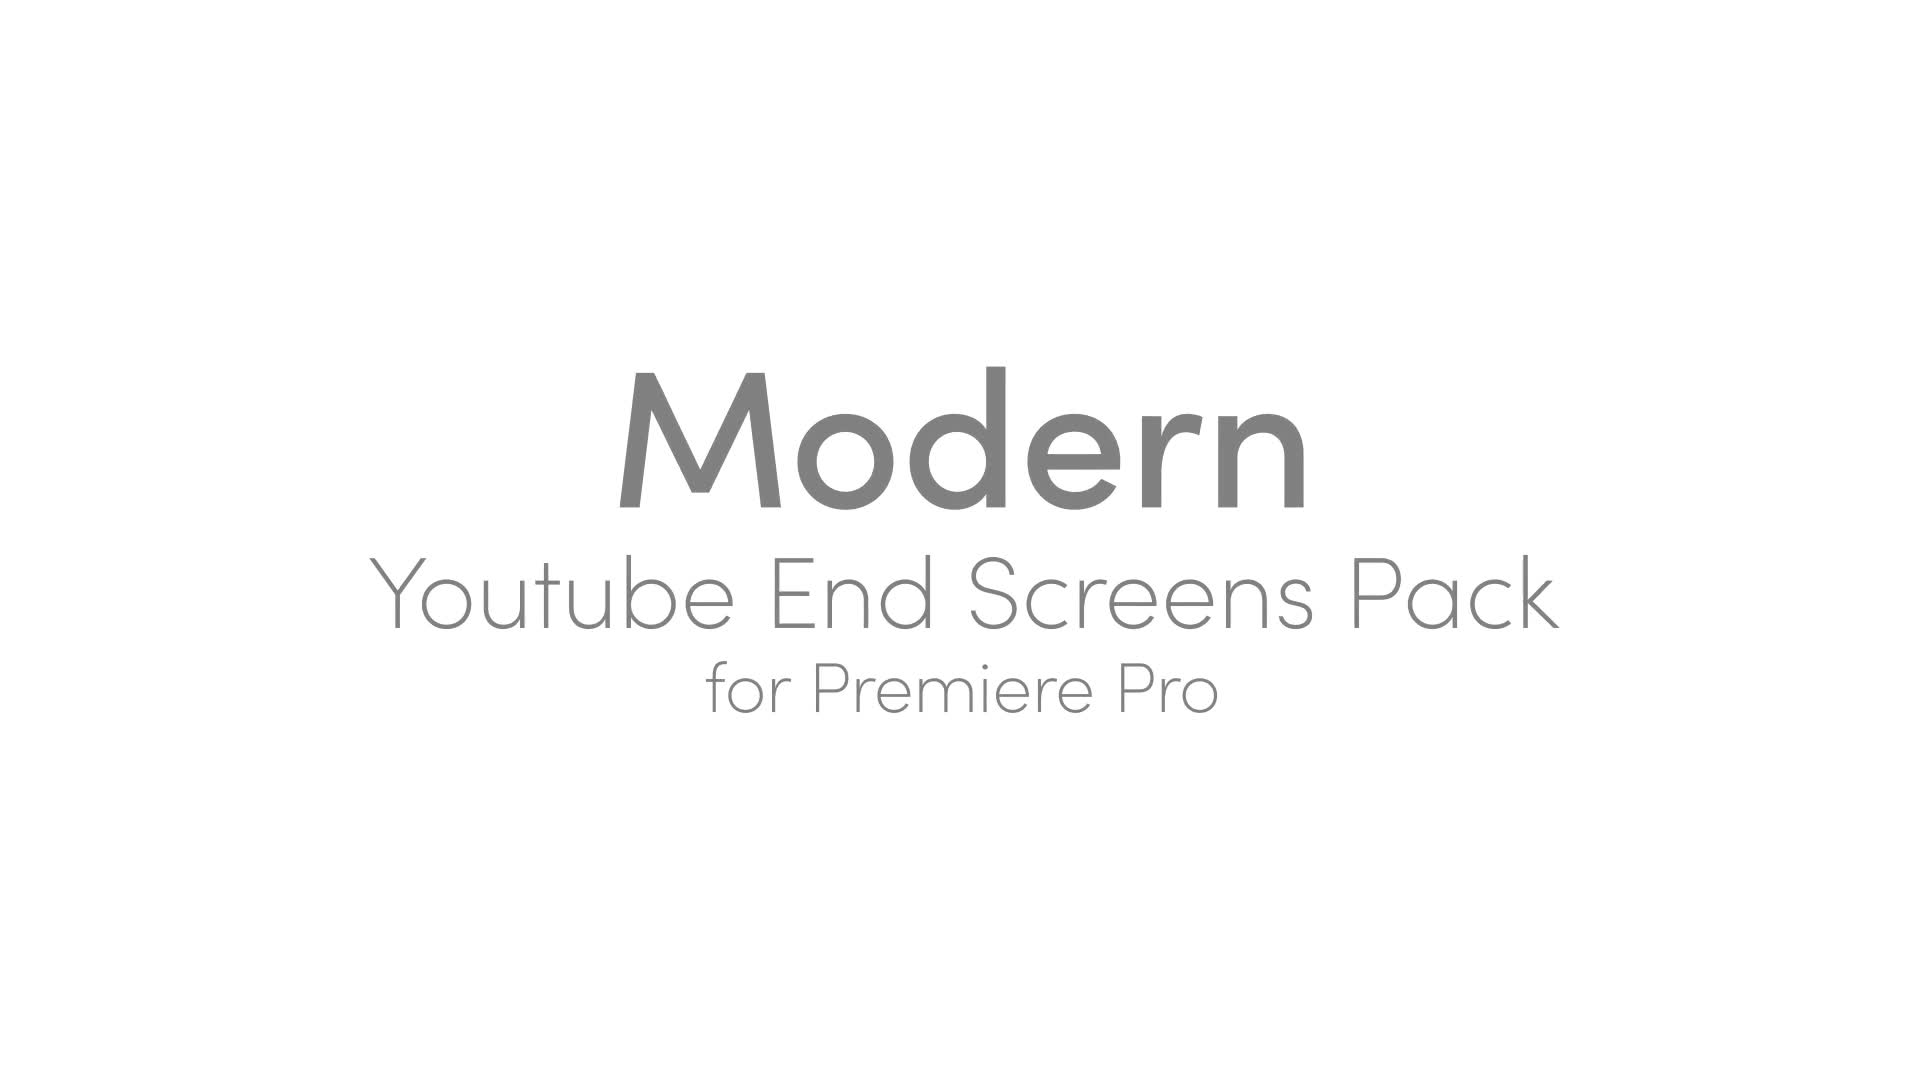 Modern Youtube Endscreens Pack for Premiere Pro Videohive 33219308 Premiere Pro Image 1